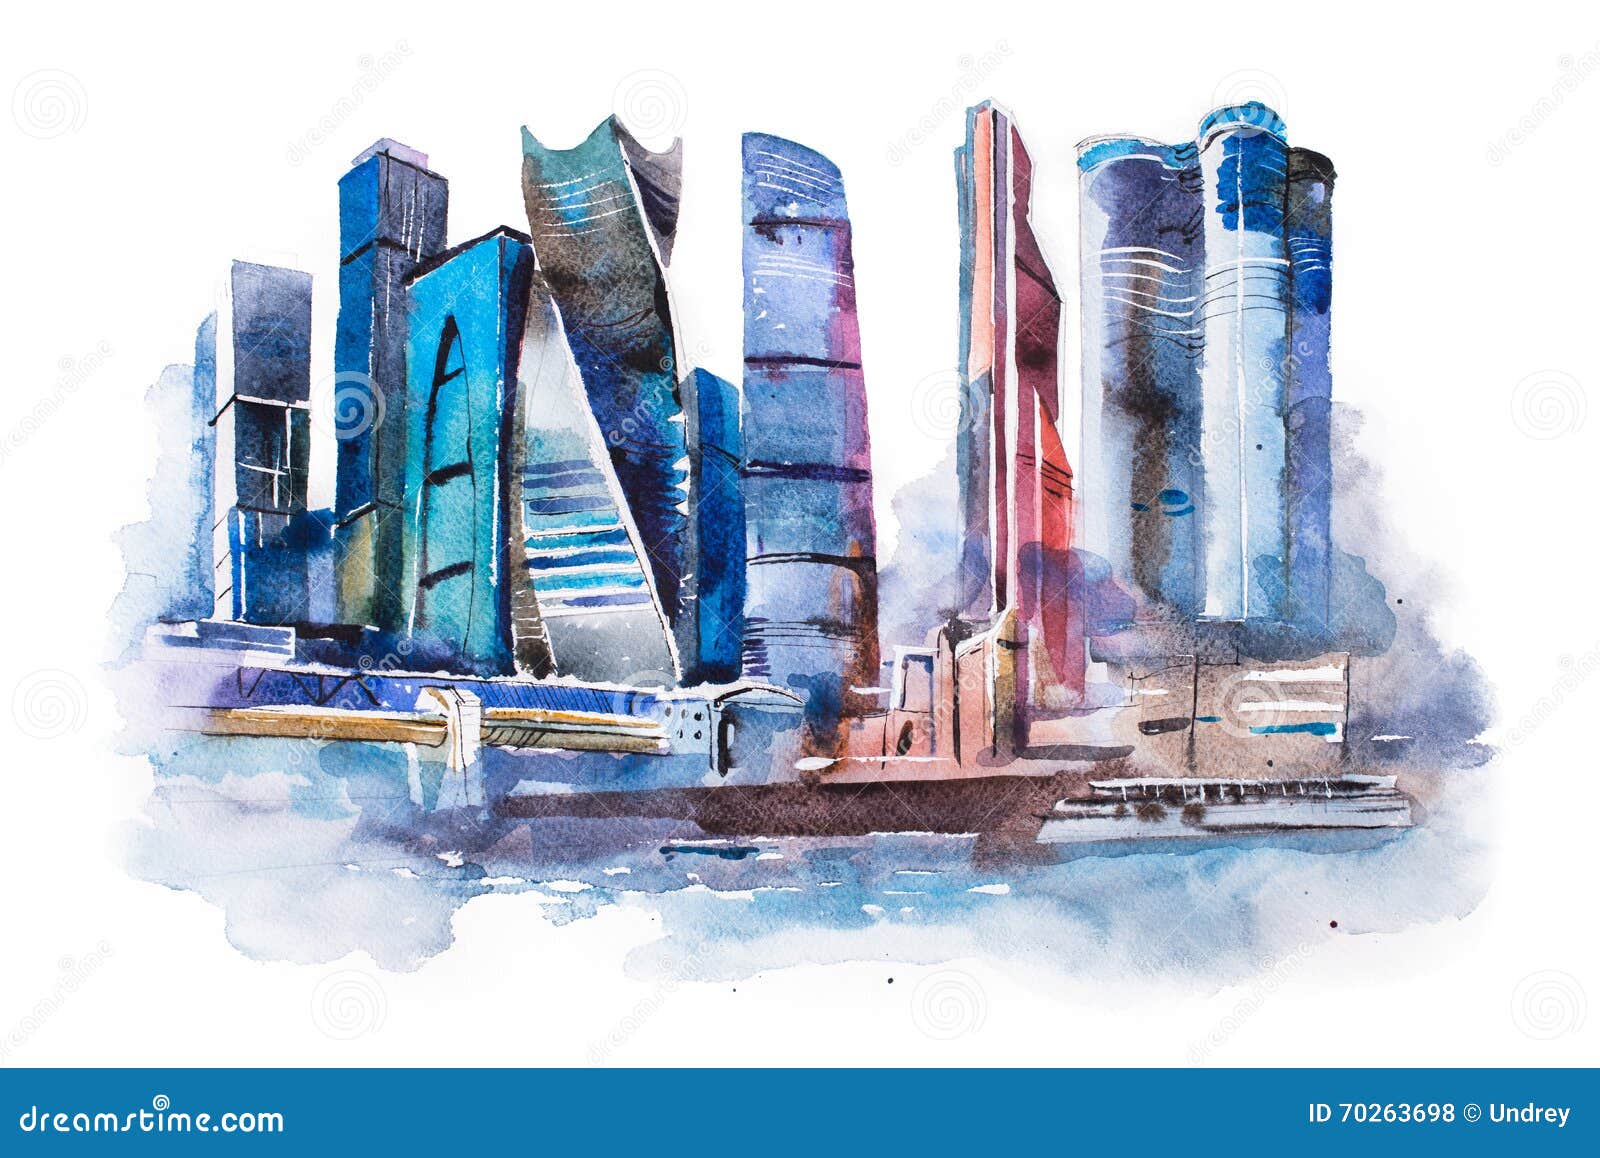 watercolor drawing of moscow city. international business center aquarelle painting